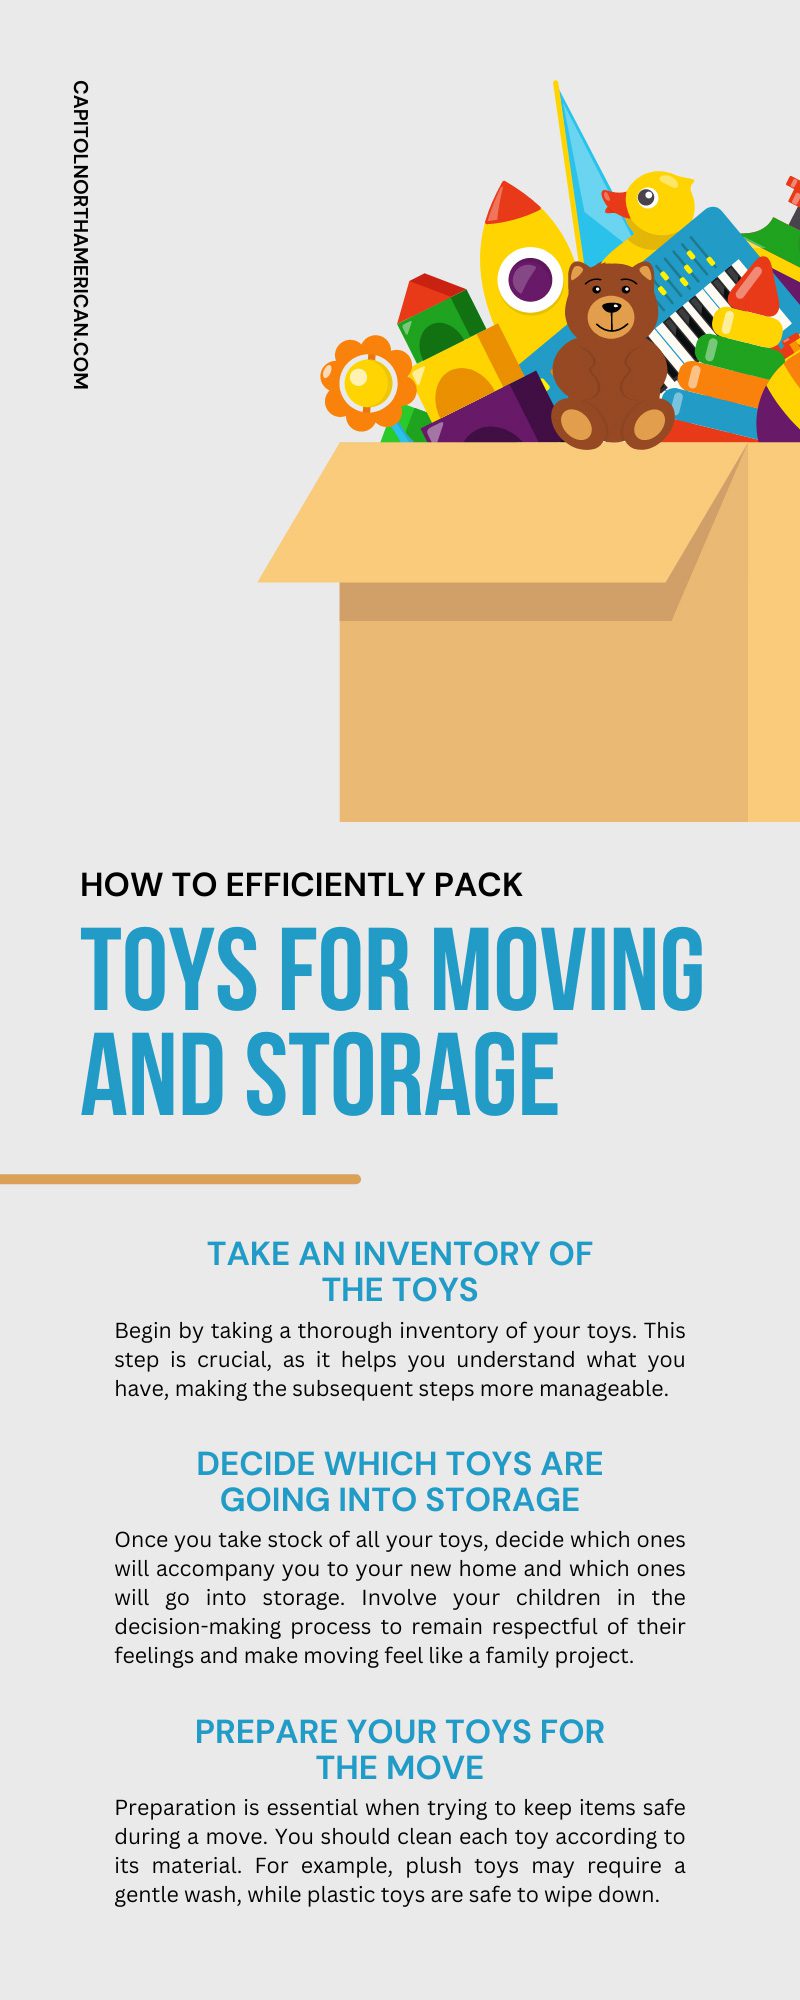 How To Efficiently Pack Toys for Moving and Storage